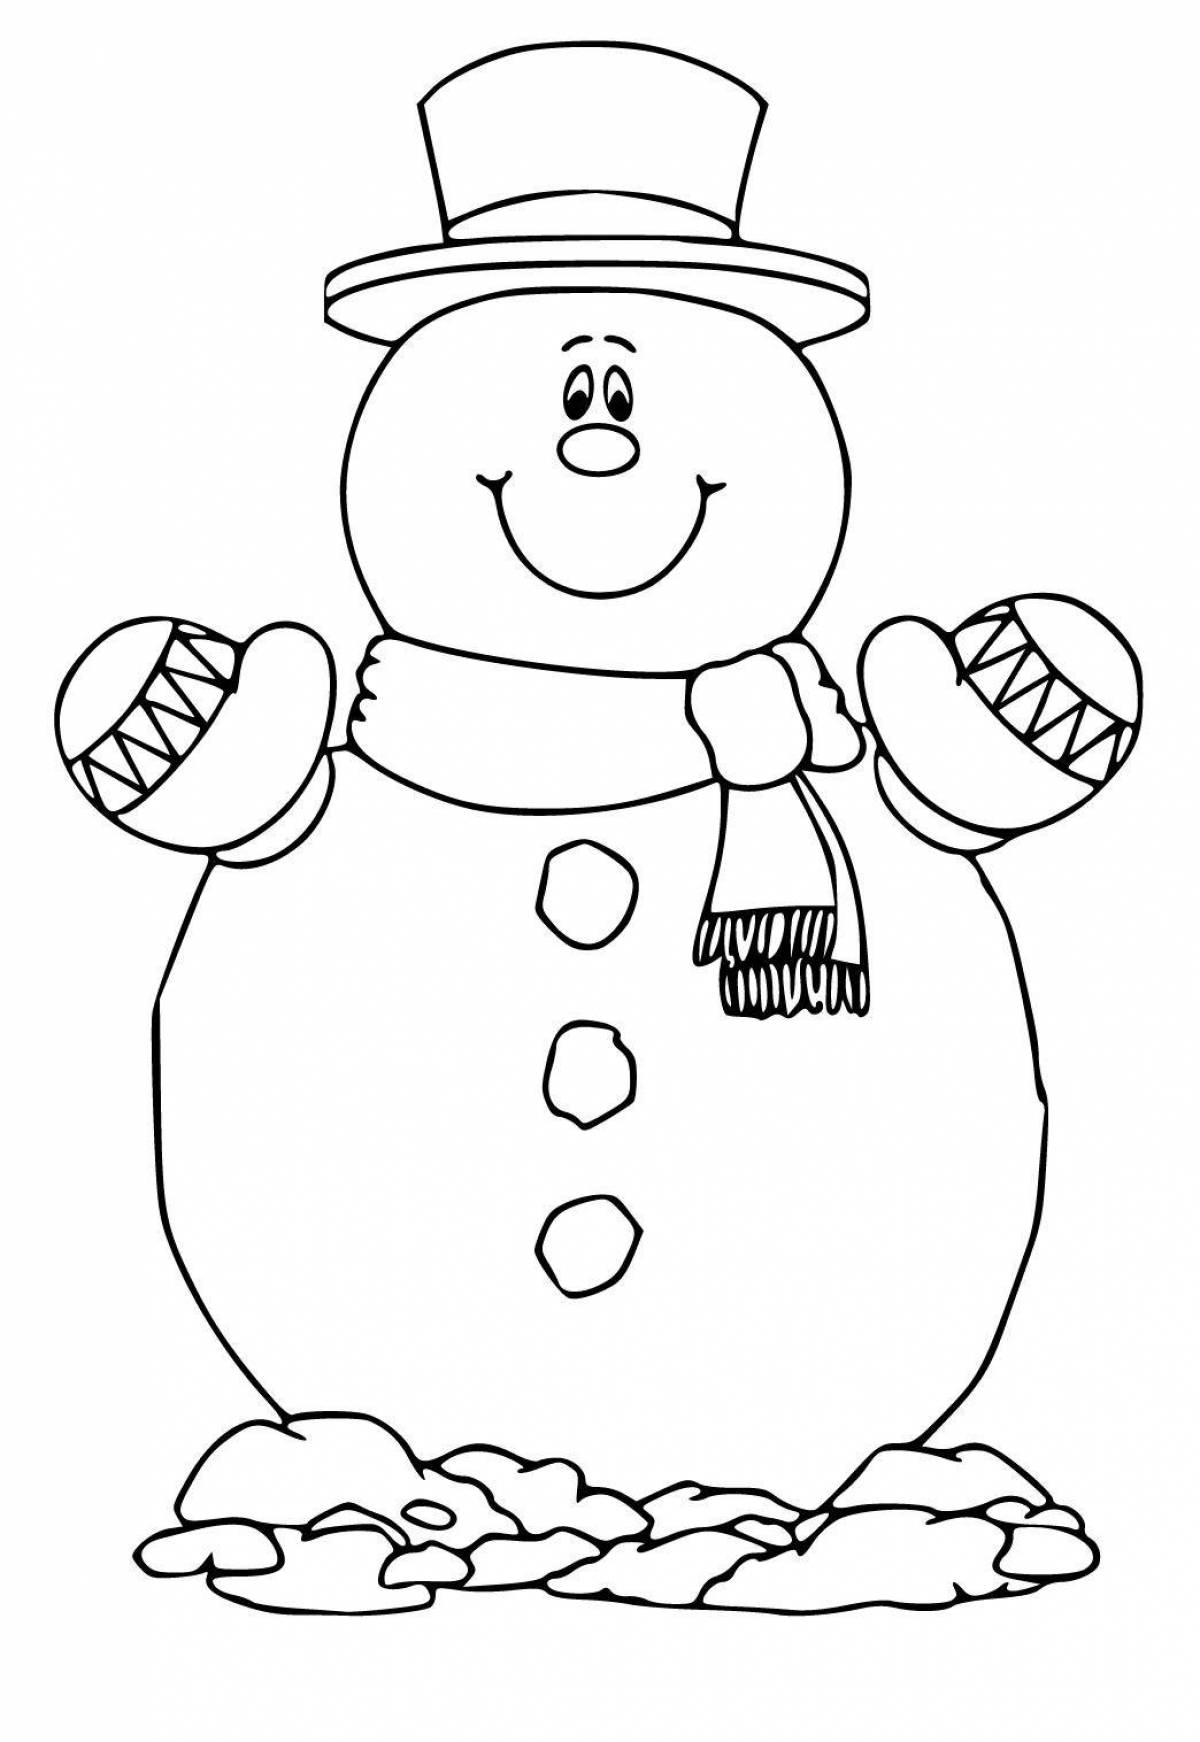 Sparkling snowman skating coloring book for kids